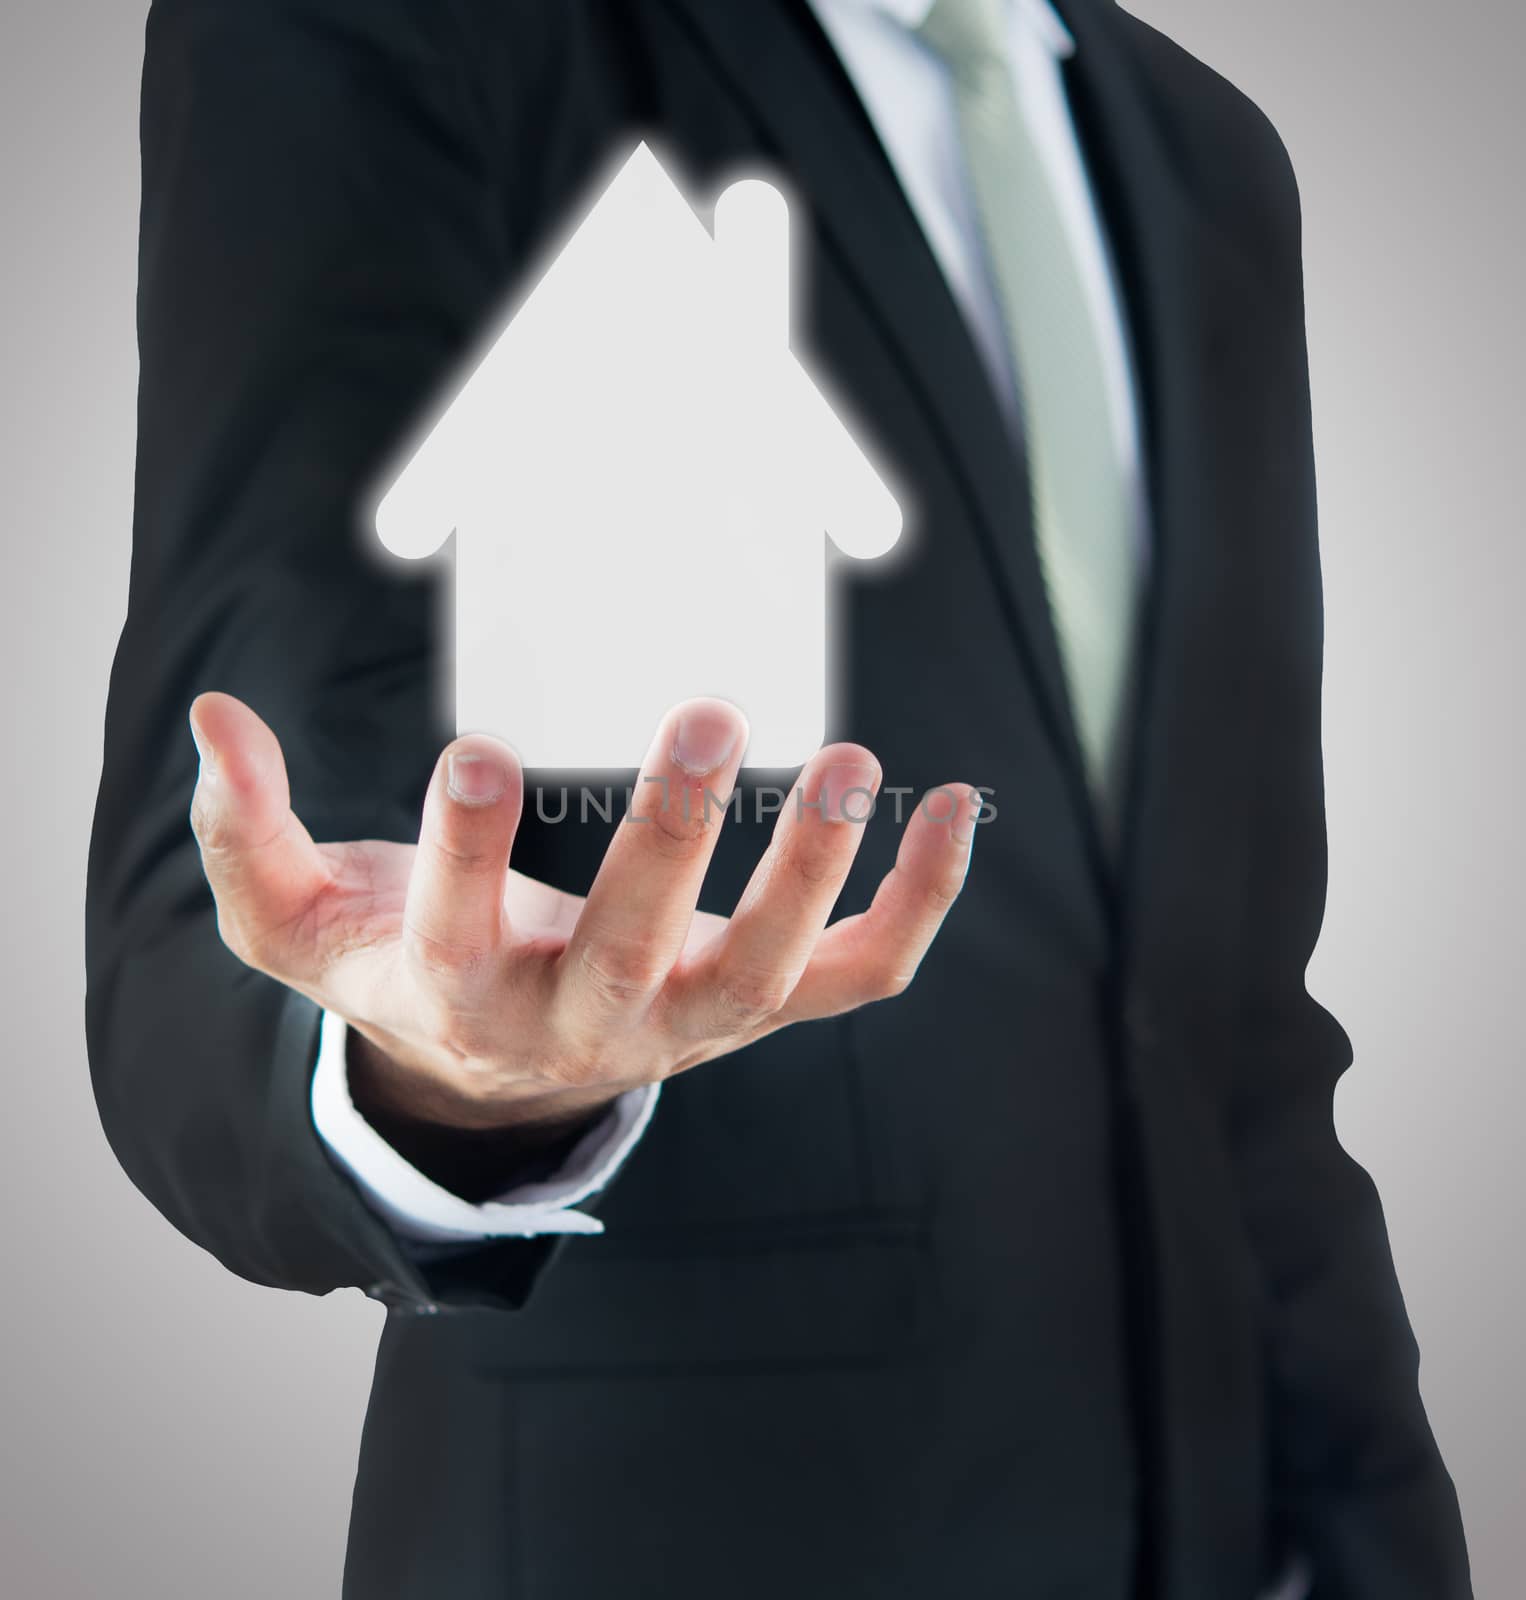 Businessman standing posture hand holding house icon isolated on over gray background